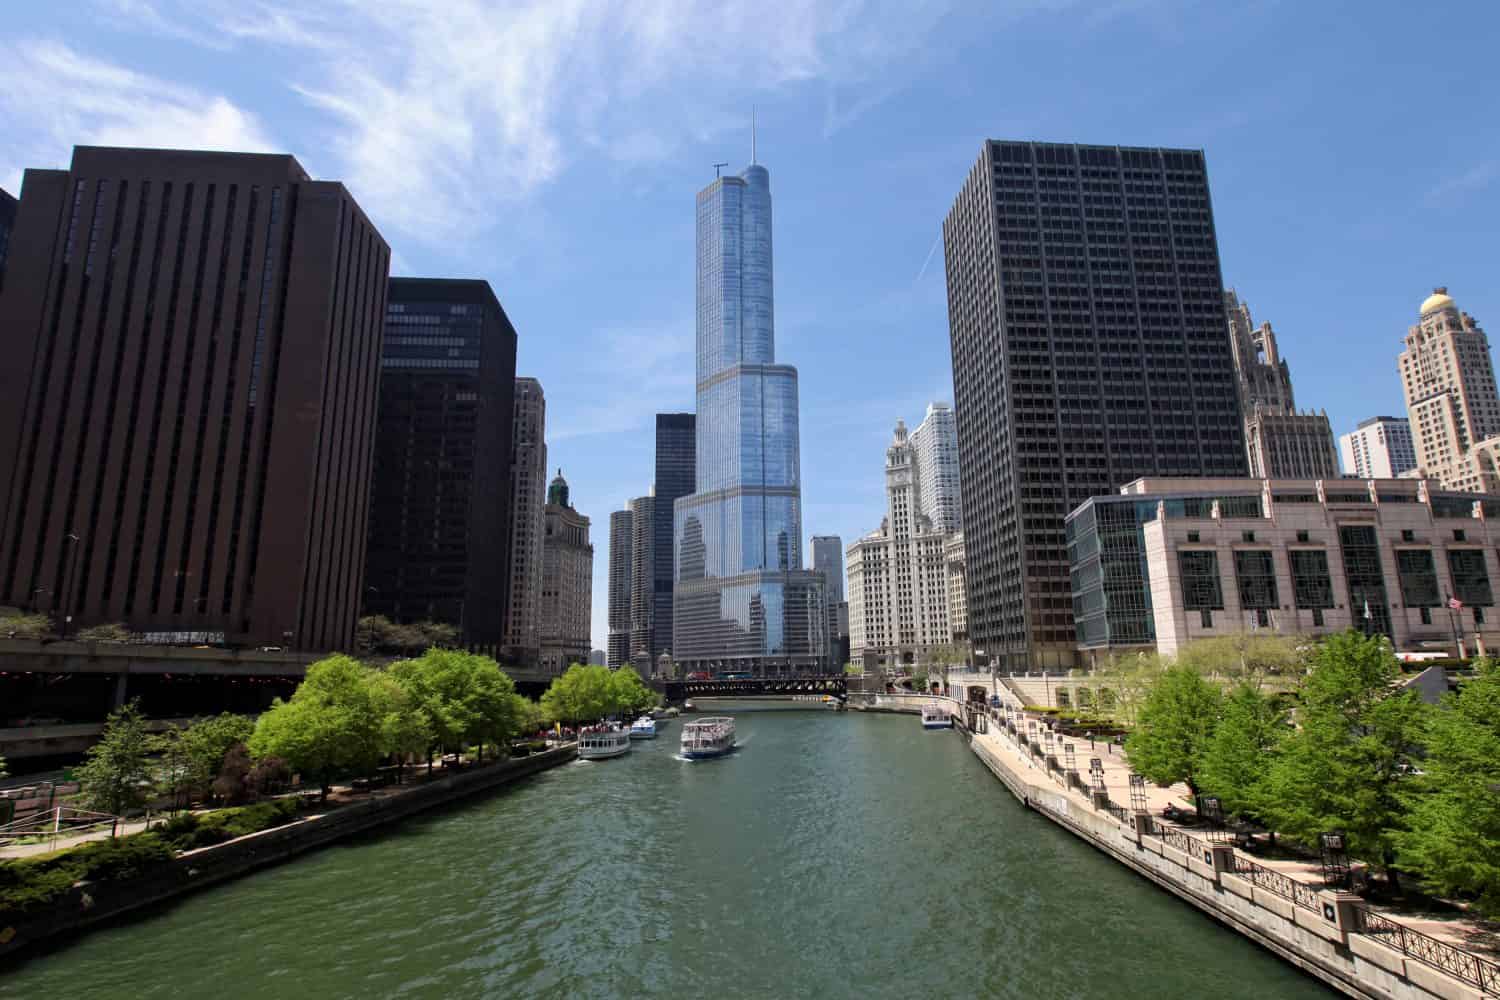 Chicago - The Trump International Hotel and Tower and Chicago River